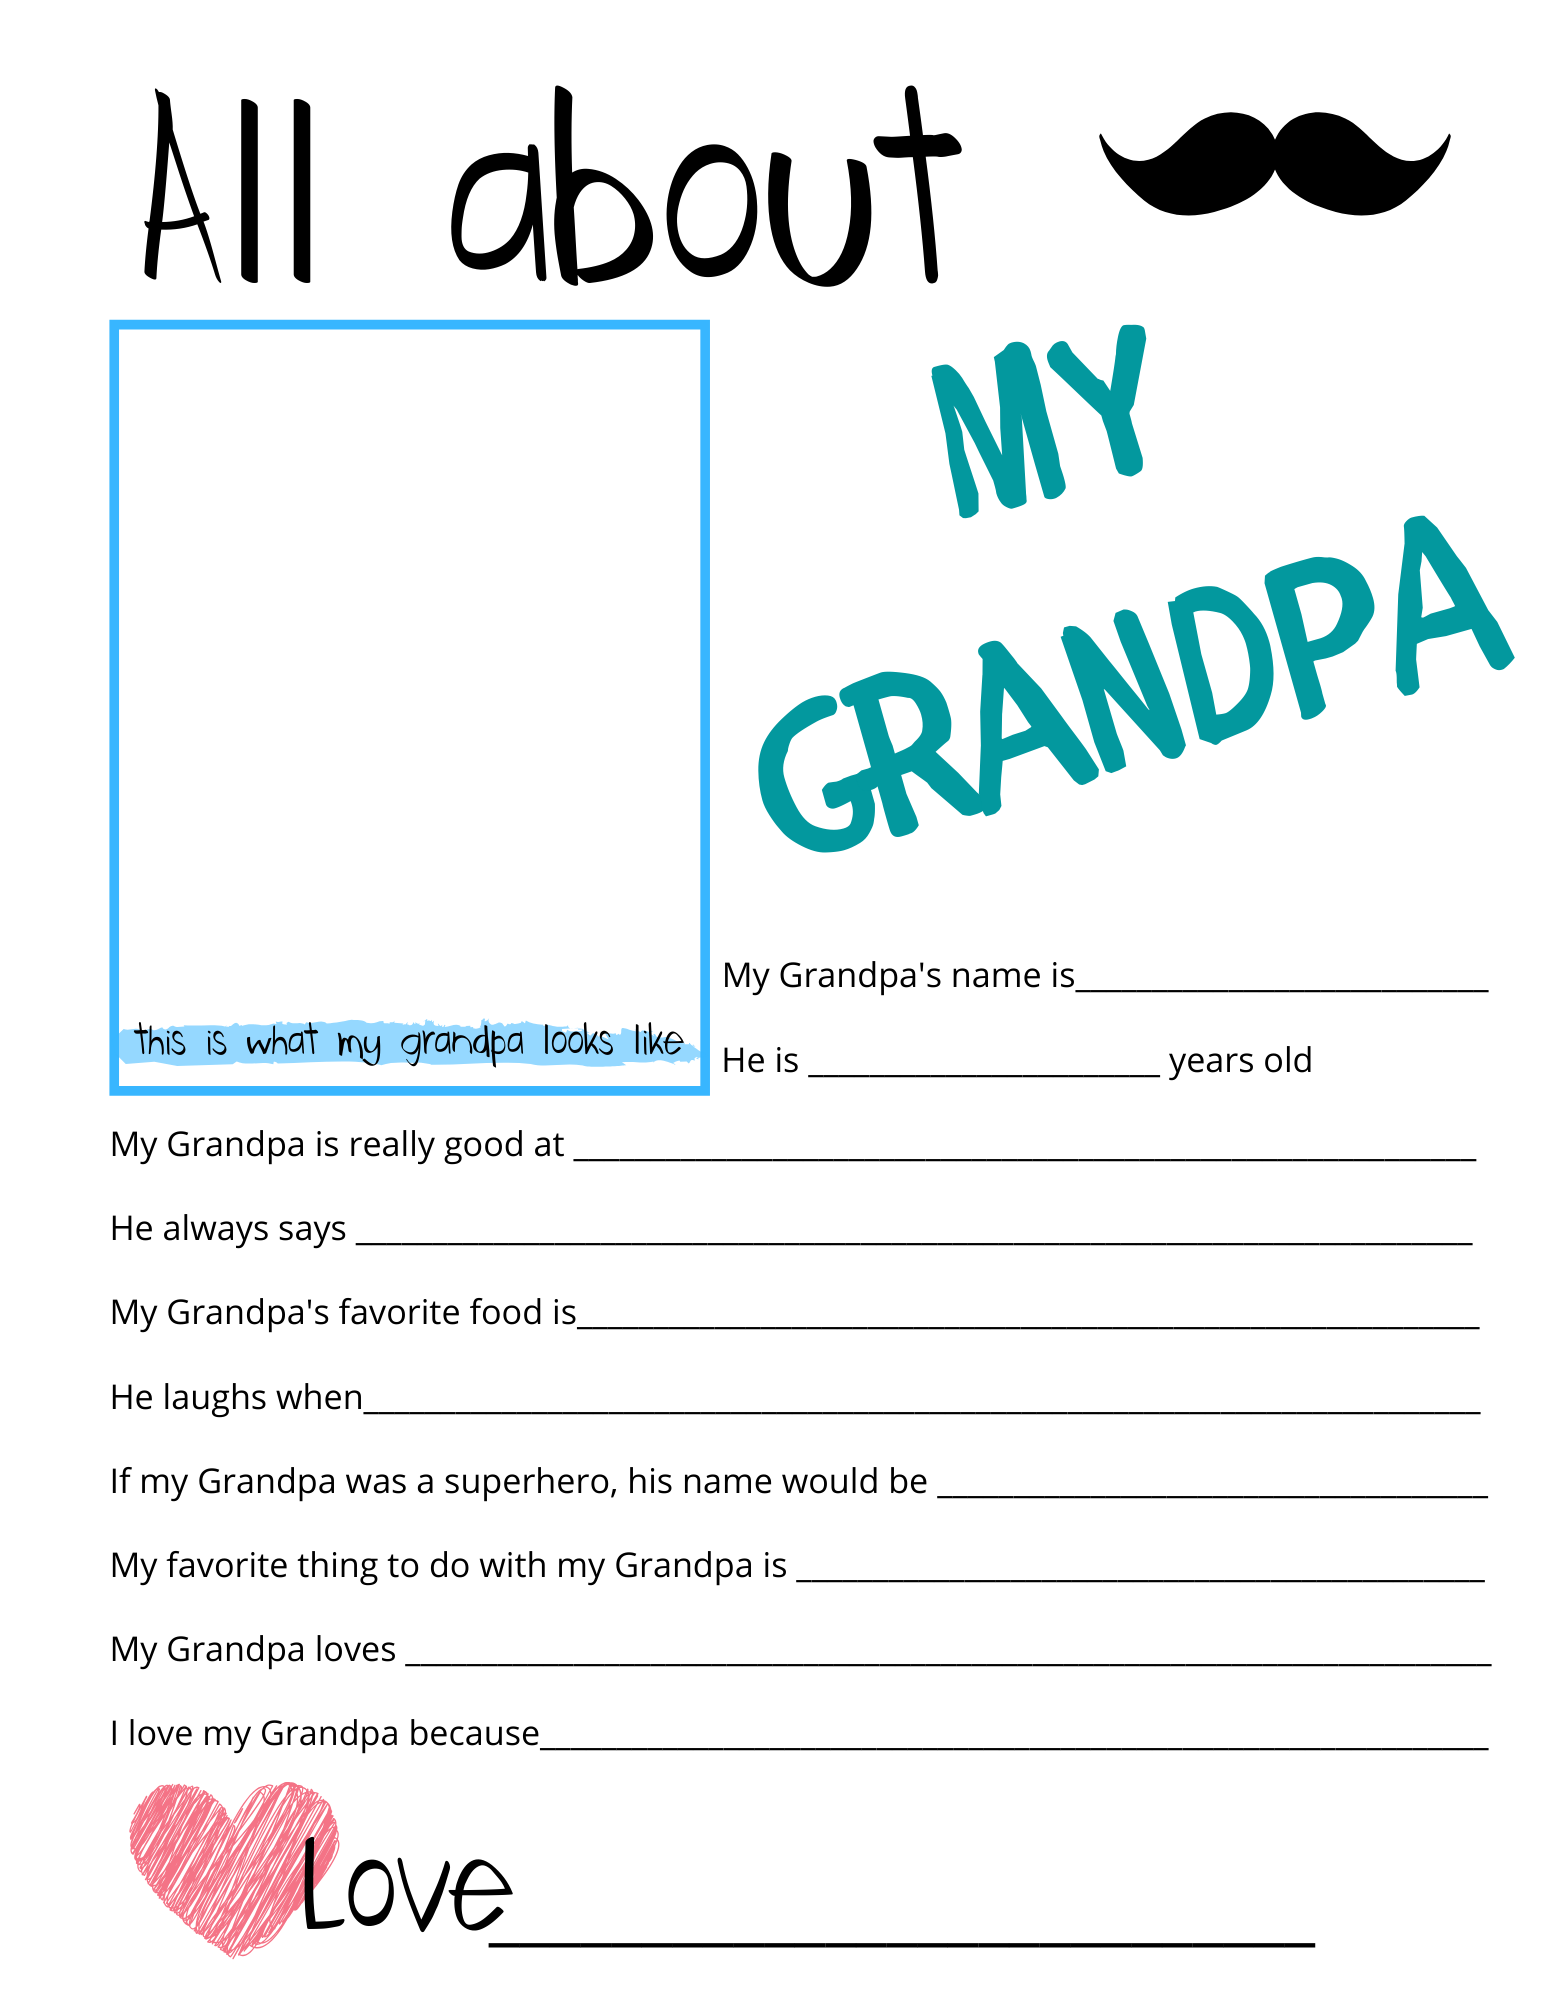 All About My Grandpa Father s Day Questionnaire Fathers Day Survey Questions Fill In The Blanks Printable Gift From Child DIY Etsy Canada Fathers Day Questionnaire Fathers Day Grandpa Birthday